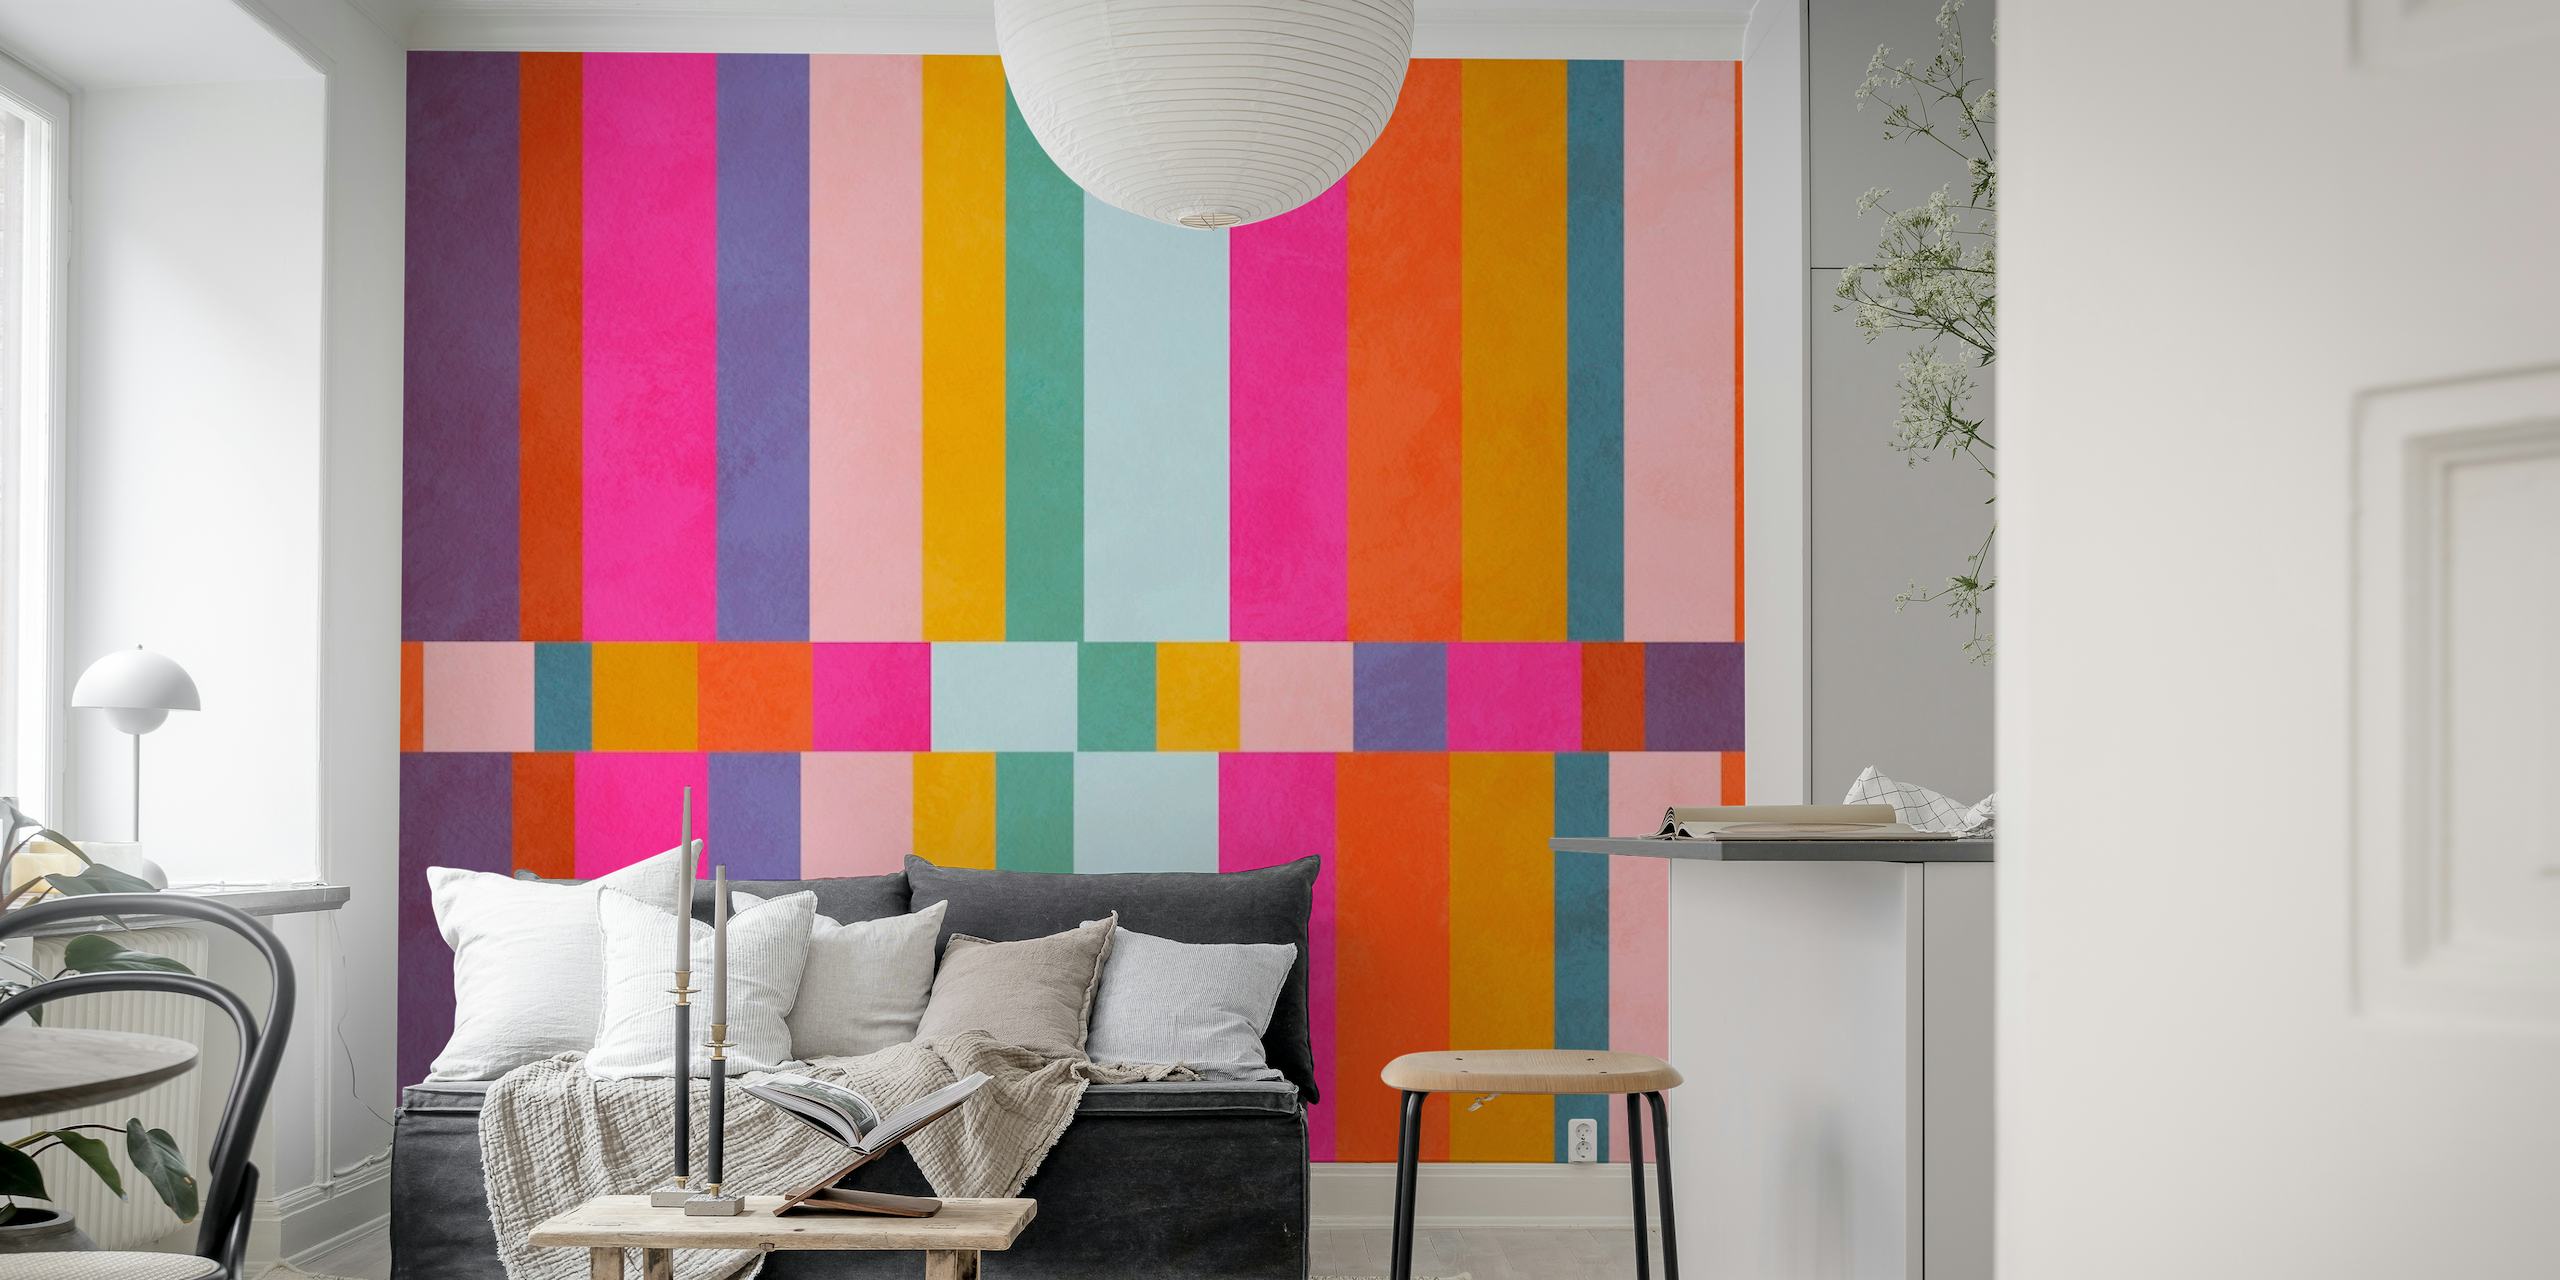 Colorful striped wall mural with a mix of purple, orange, green, and blue shades